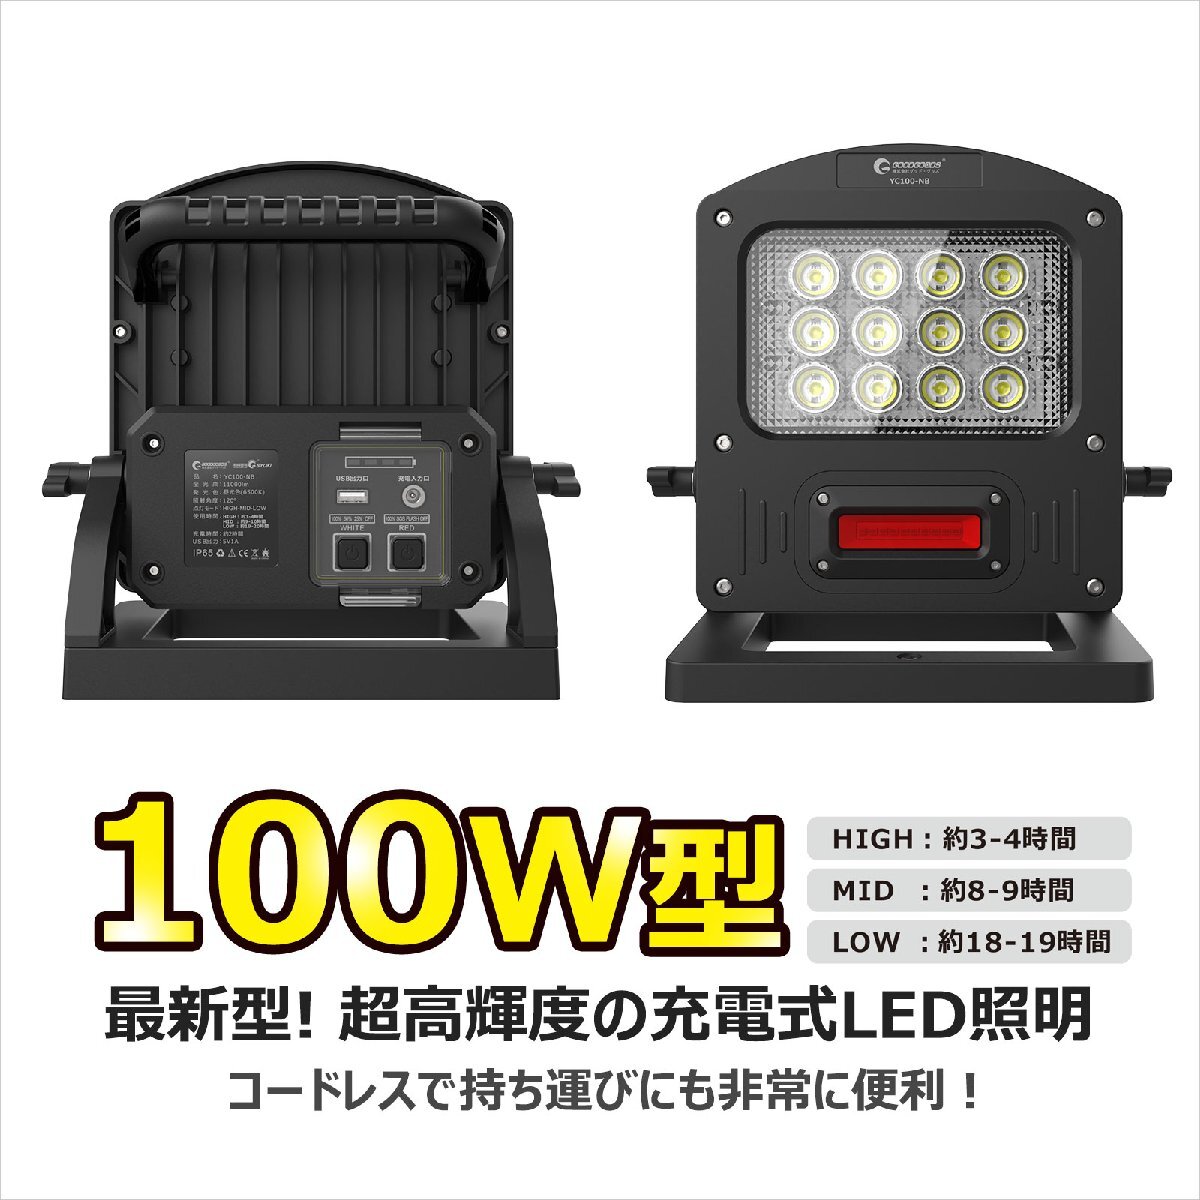 LED floodlight rechargeable light 100W 10000lm daytime light color 5W red warning light IP65 waterproof lighting working light instant off function car maintenance nighttime work USB output YC100-NB